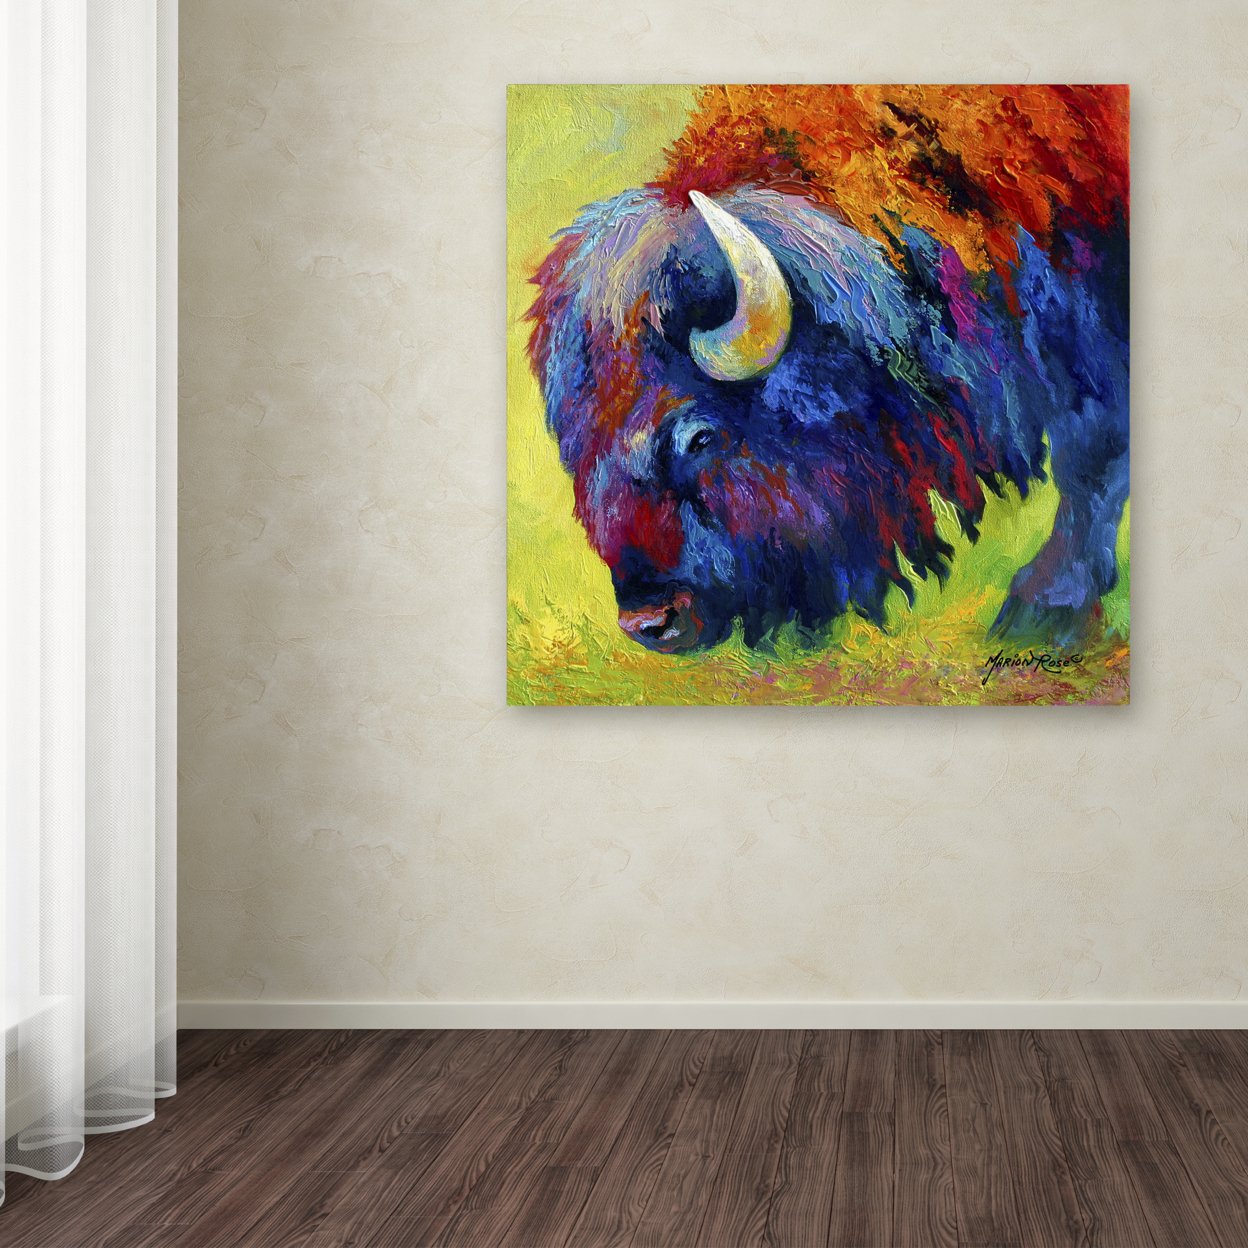 Marion Rose 'Bison Portrait II' Ready To Hang Canvas Art 14 X 14 Inches Made In USA